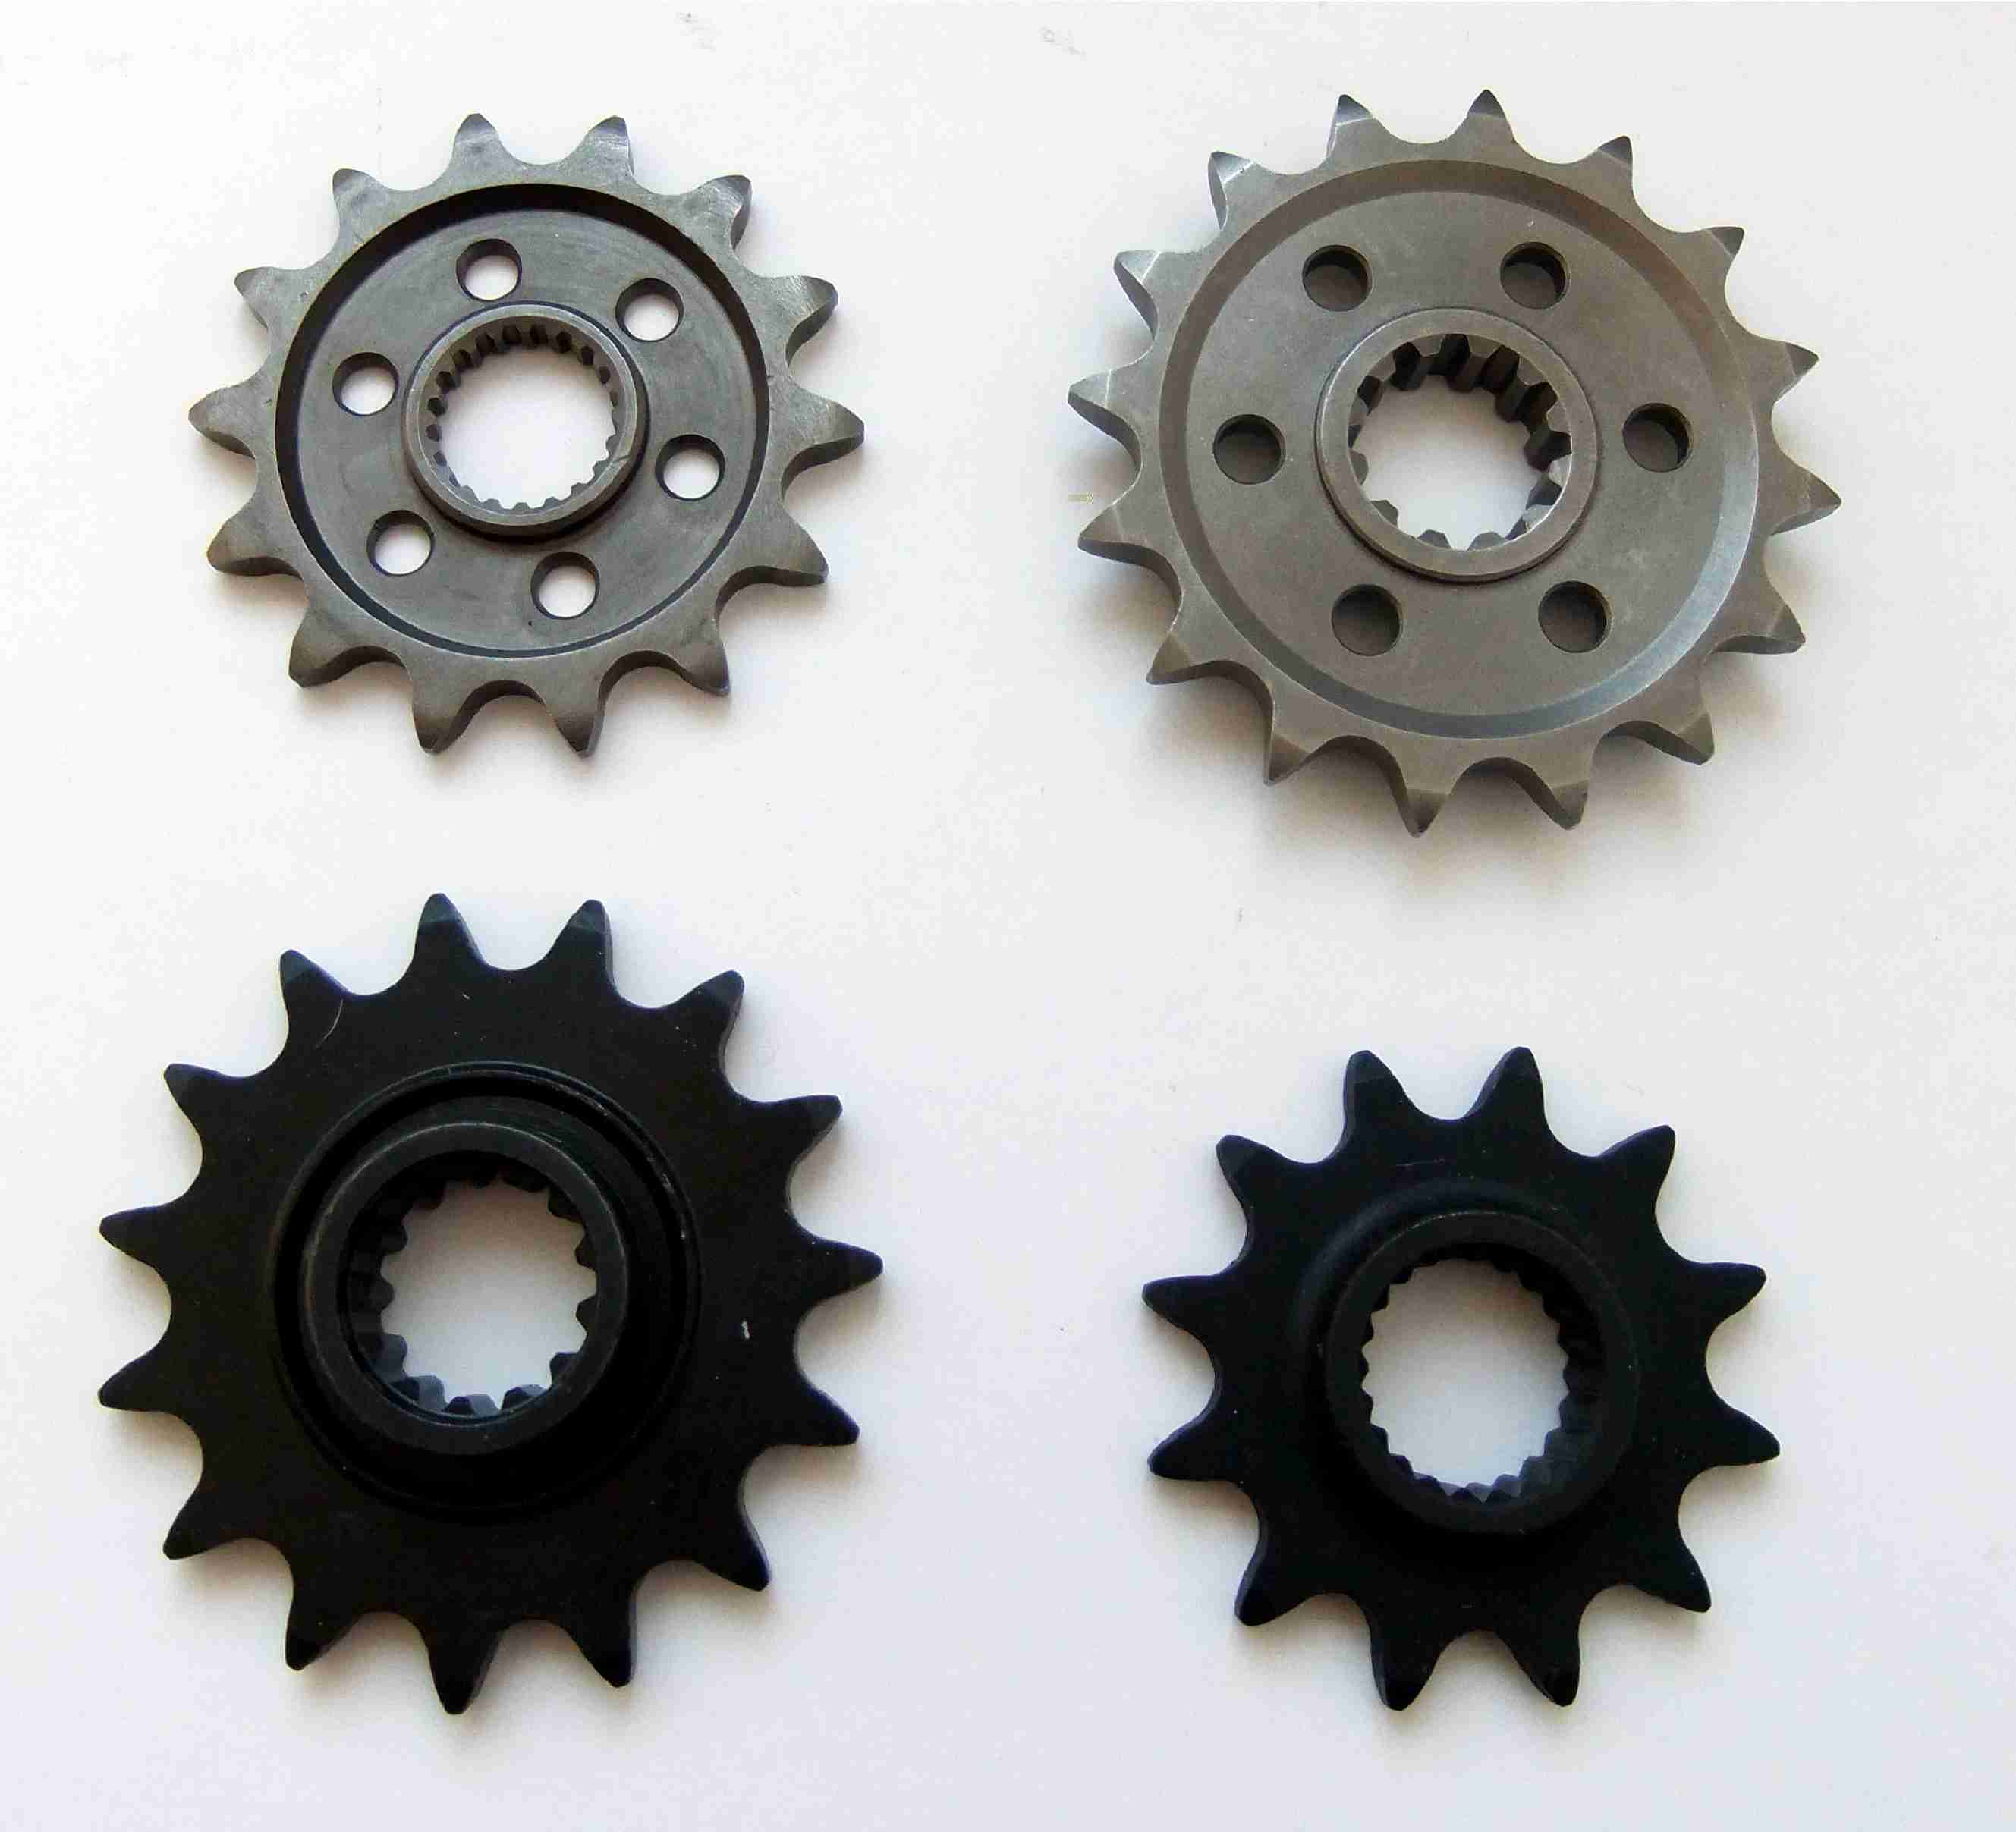 SCHREMS FRONT SPROCKET RM 80/85ALL YZ 80 93-01